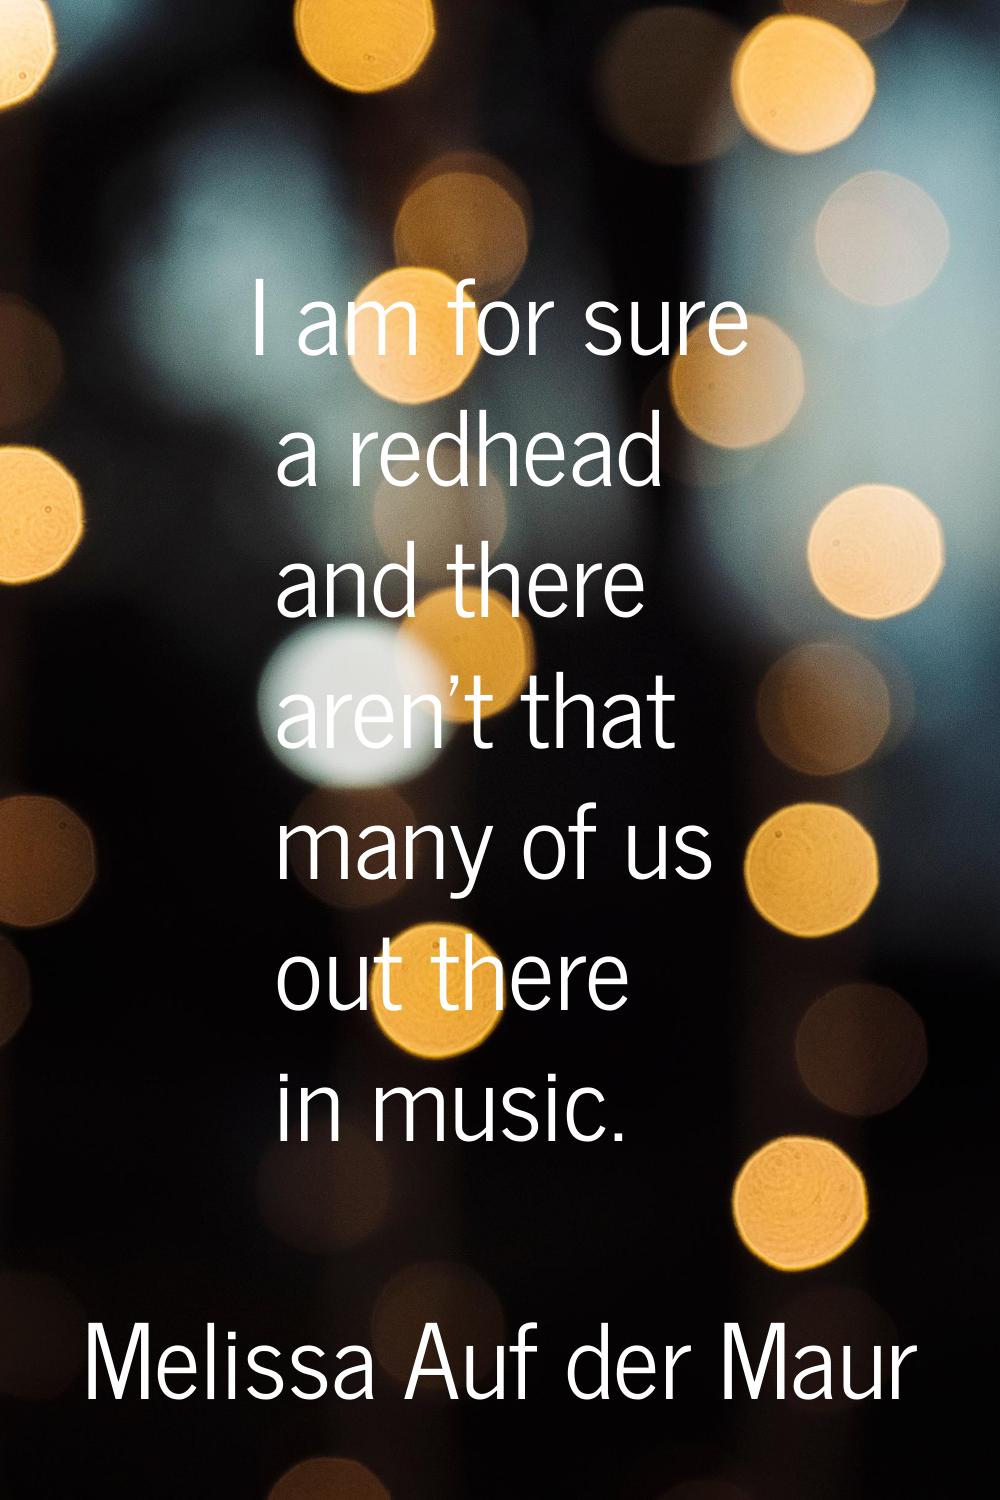 I am for sure a redhead and there aren't that many of us out there in music.